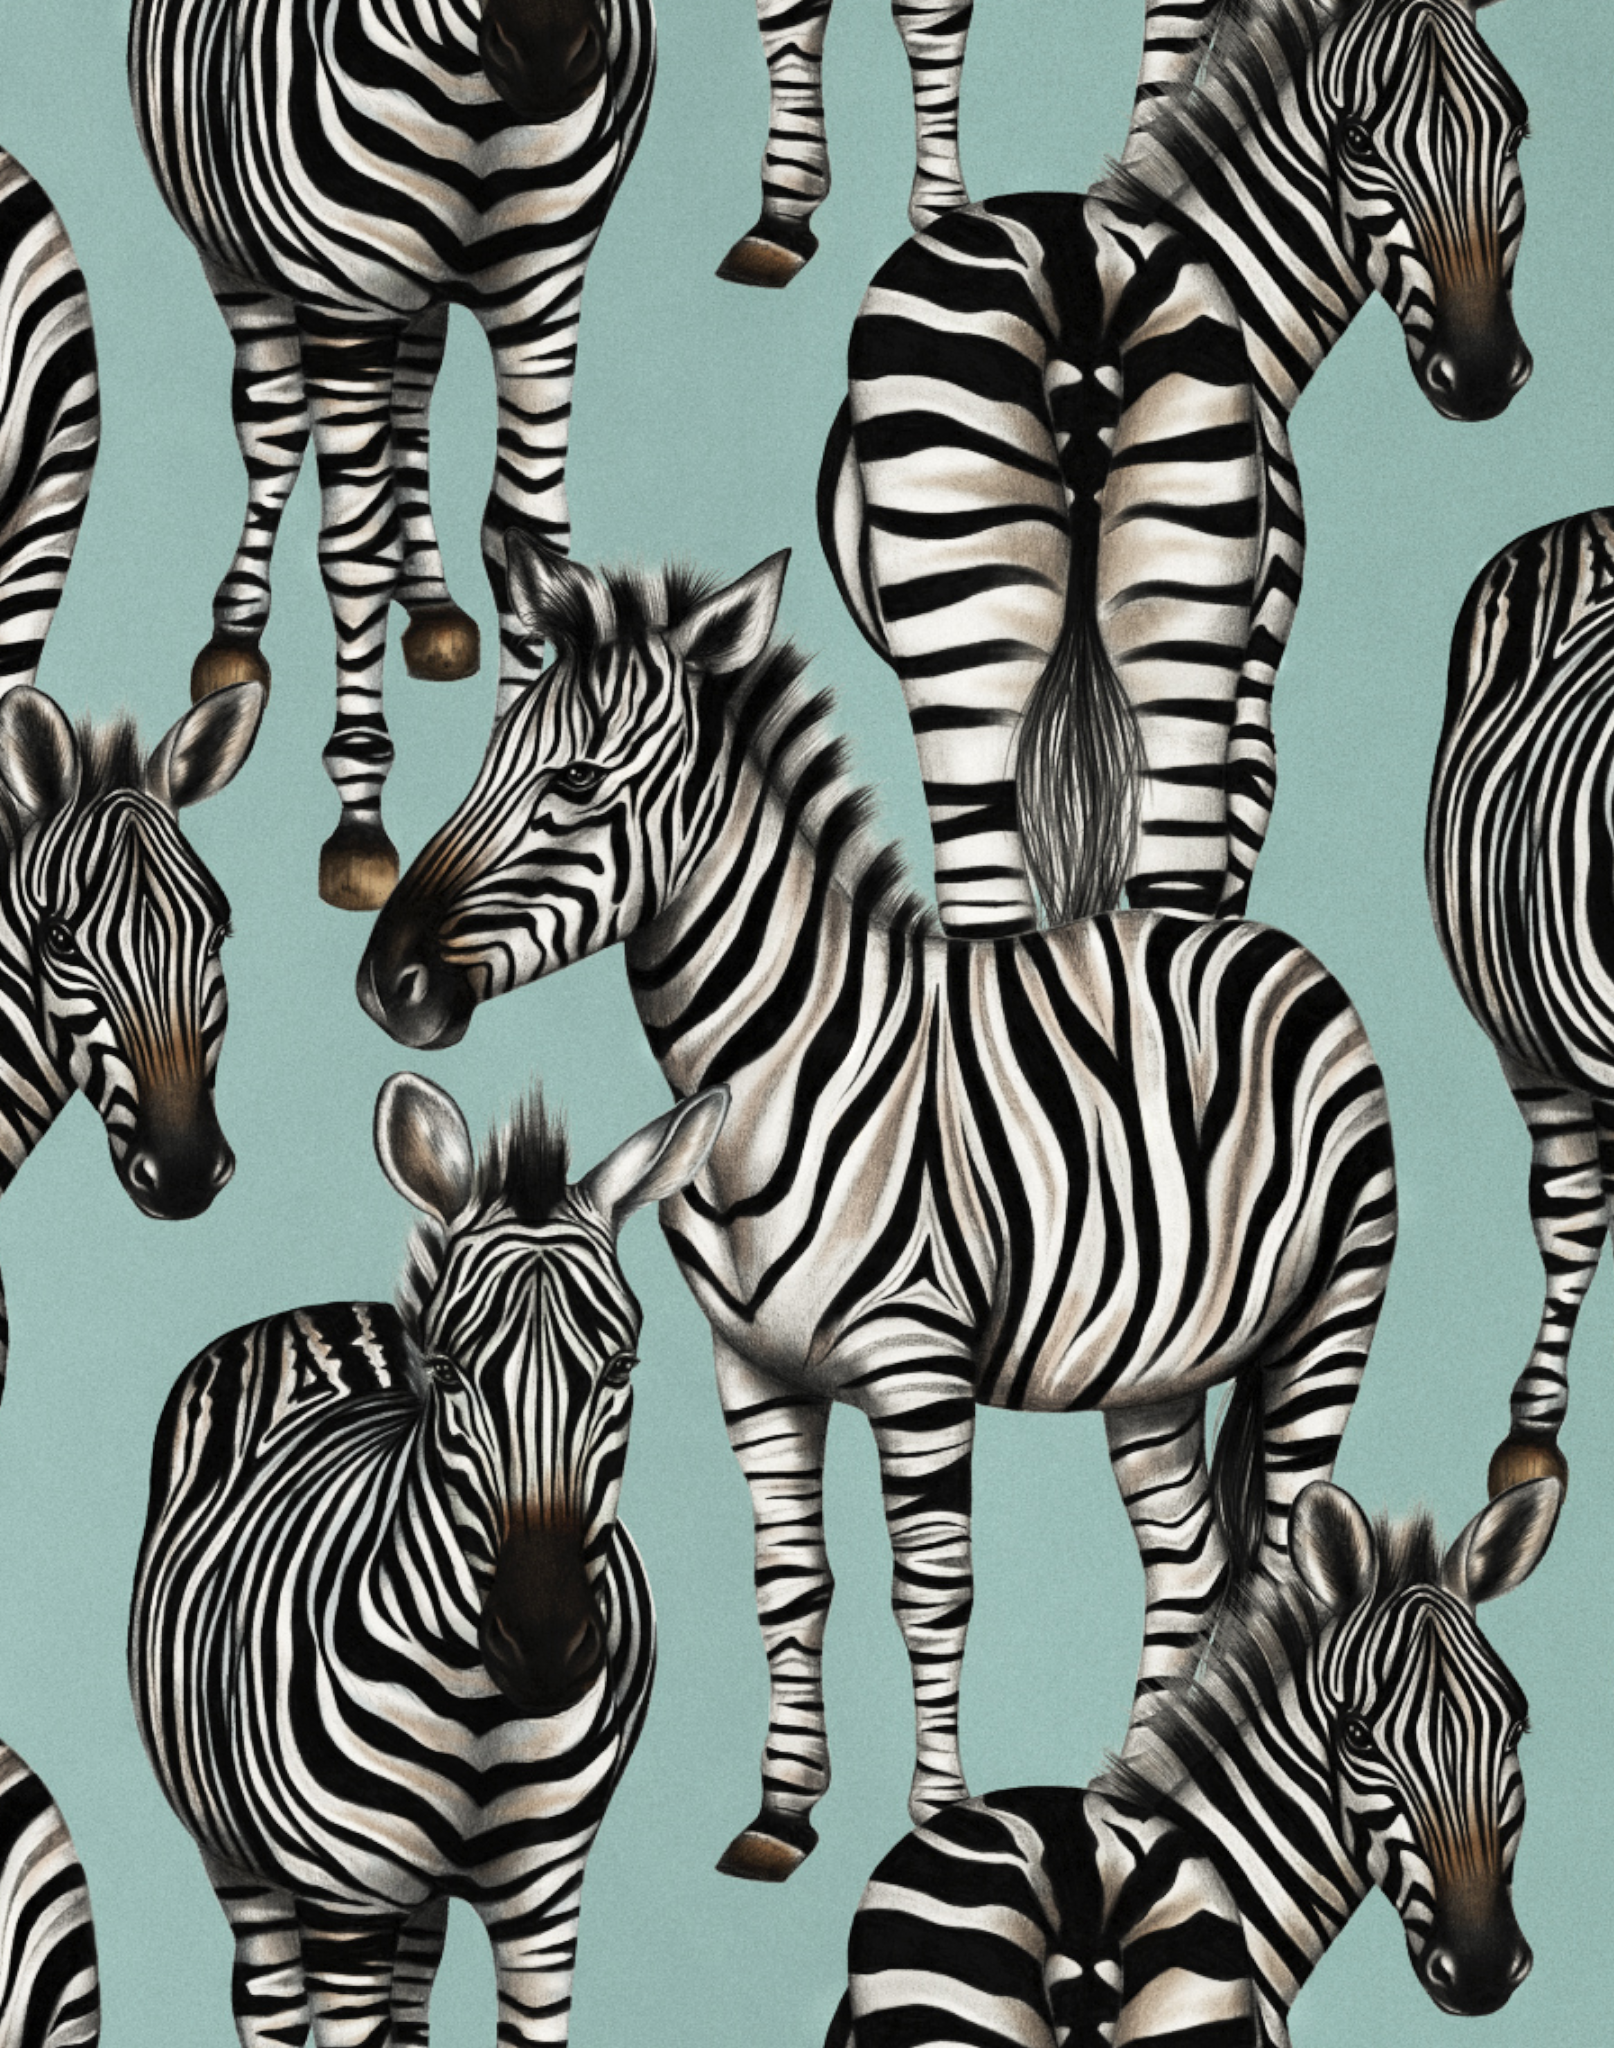 Zebras Collective – The Pattern